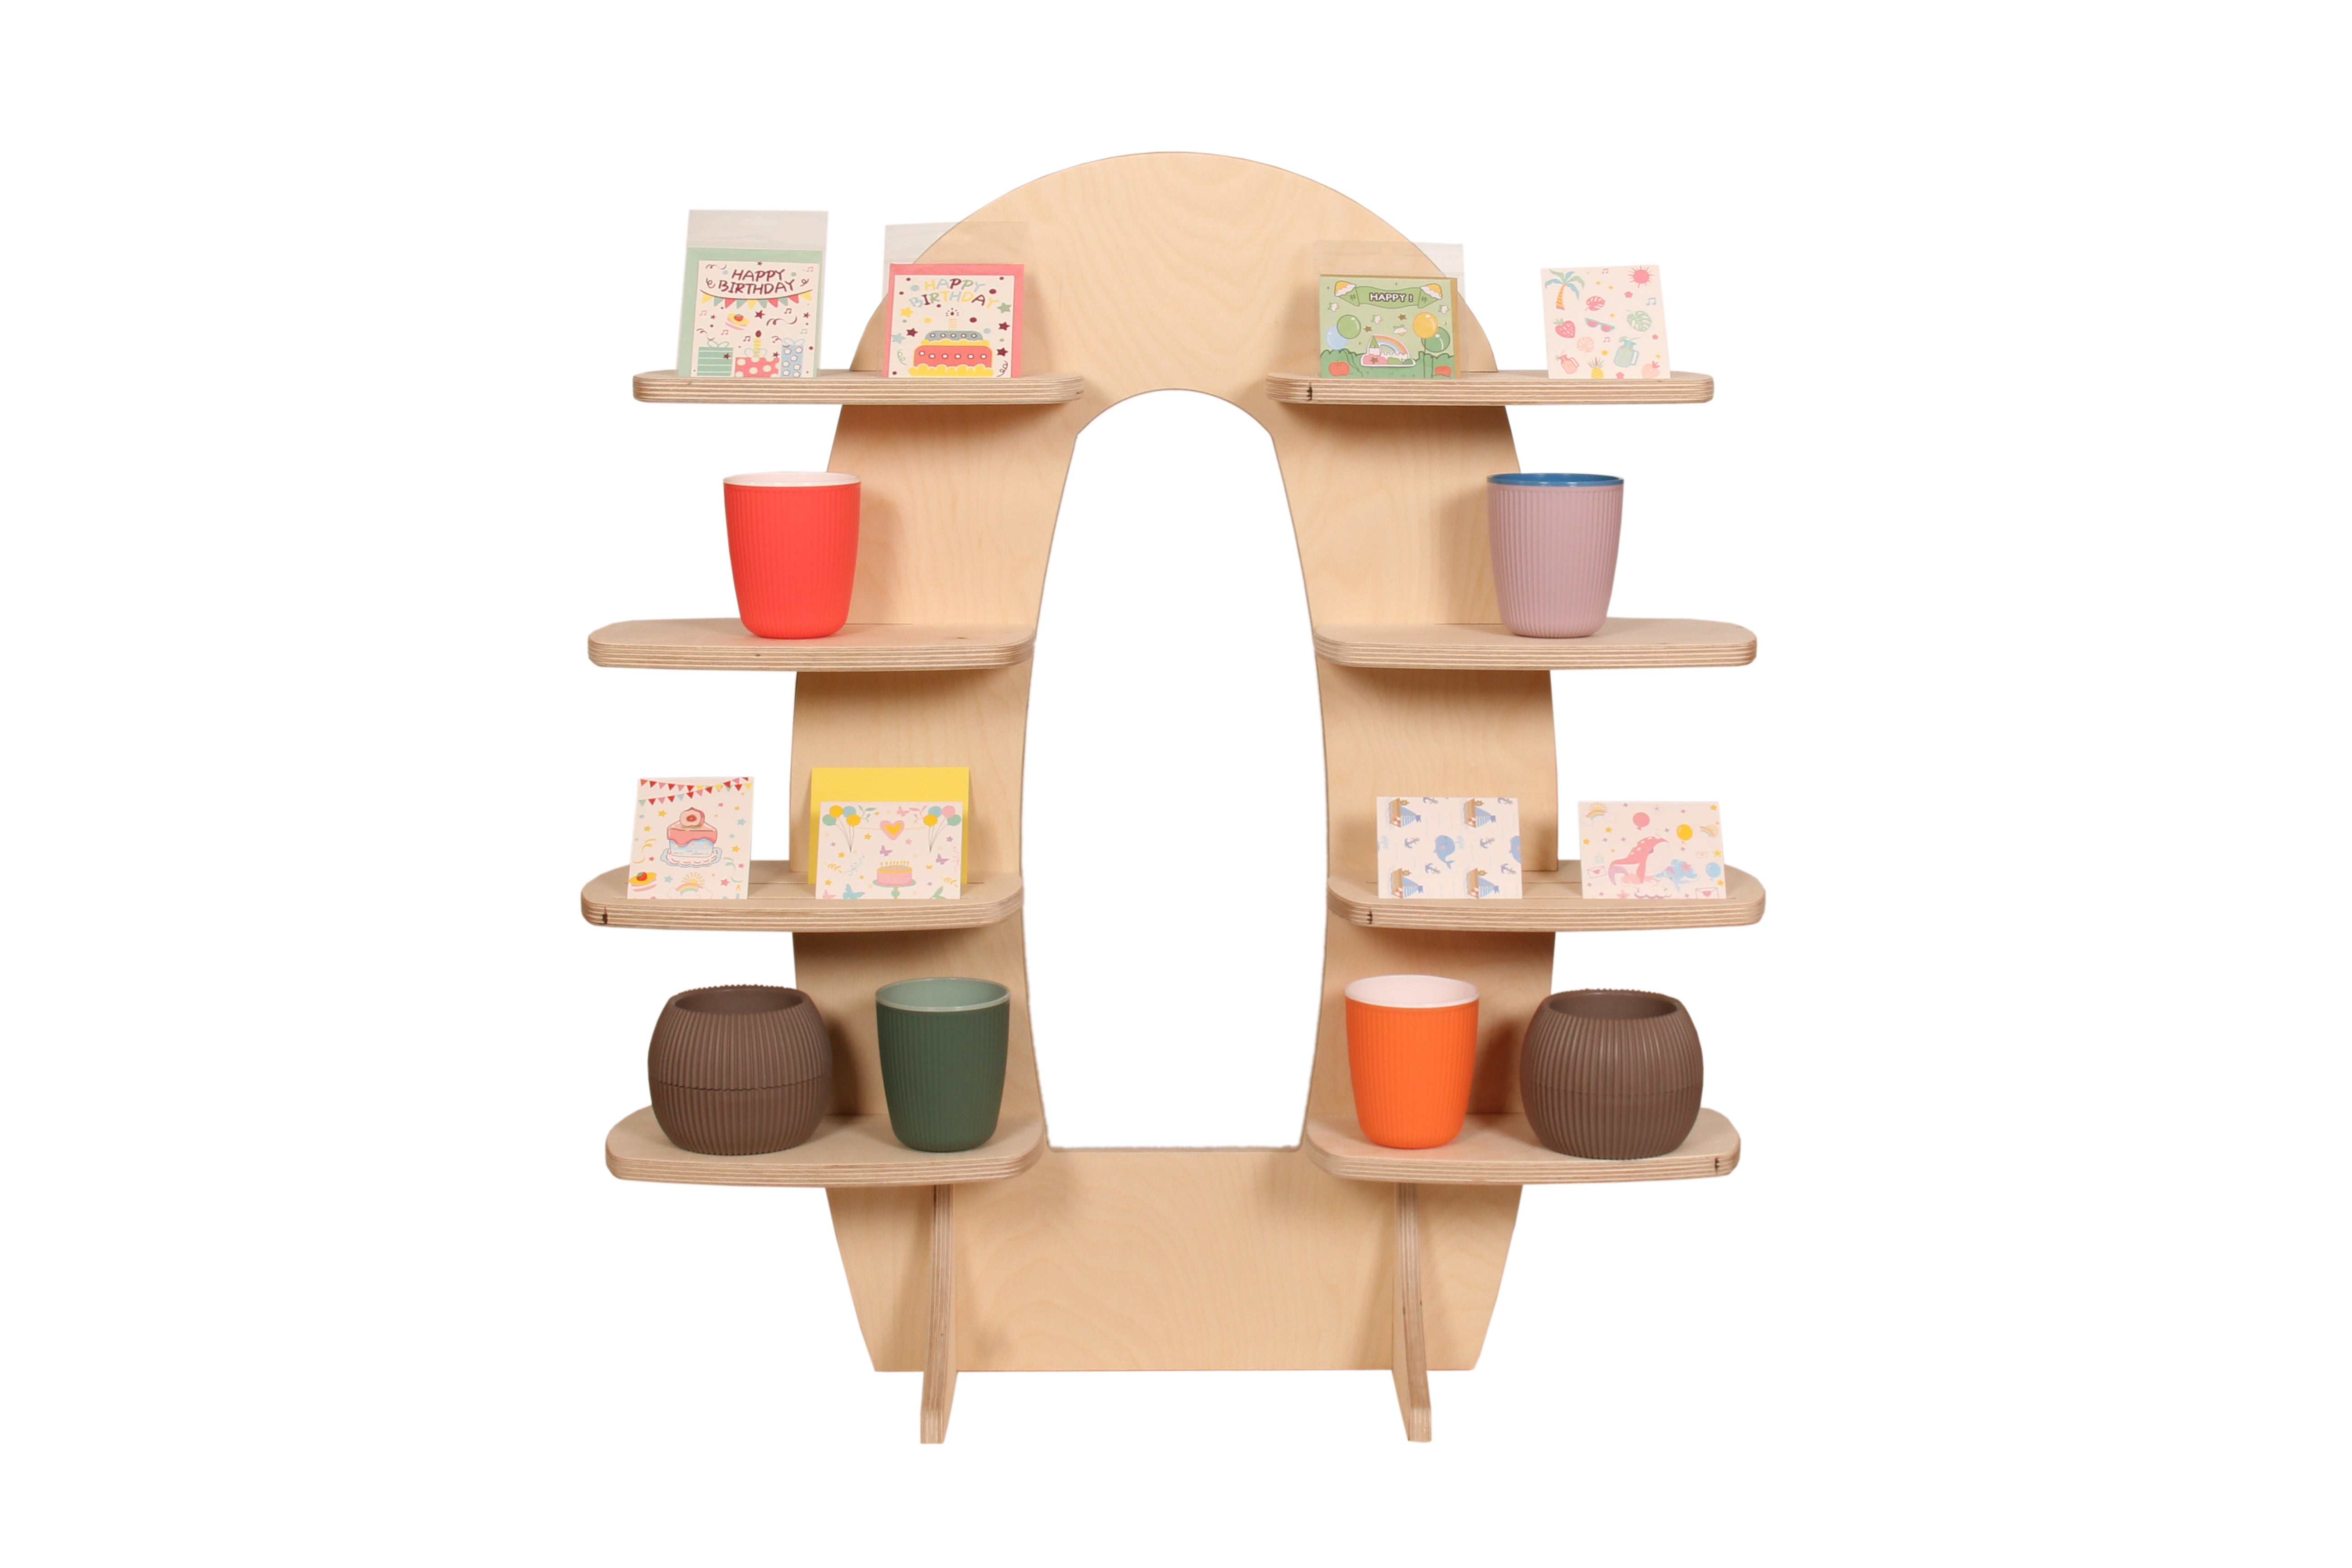 Oval Collapsible Stand, Retail Display, Market Display, Stand Alone Shelf, Market Stall, Fair Display, Product Display Rack